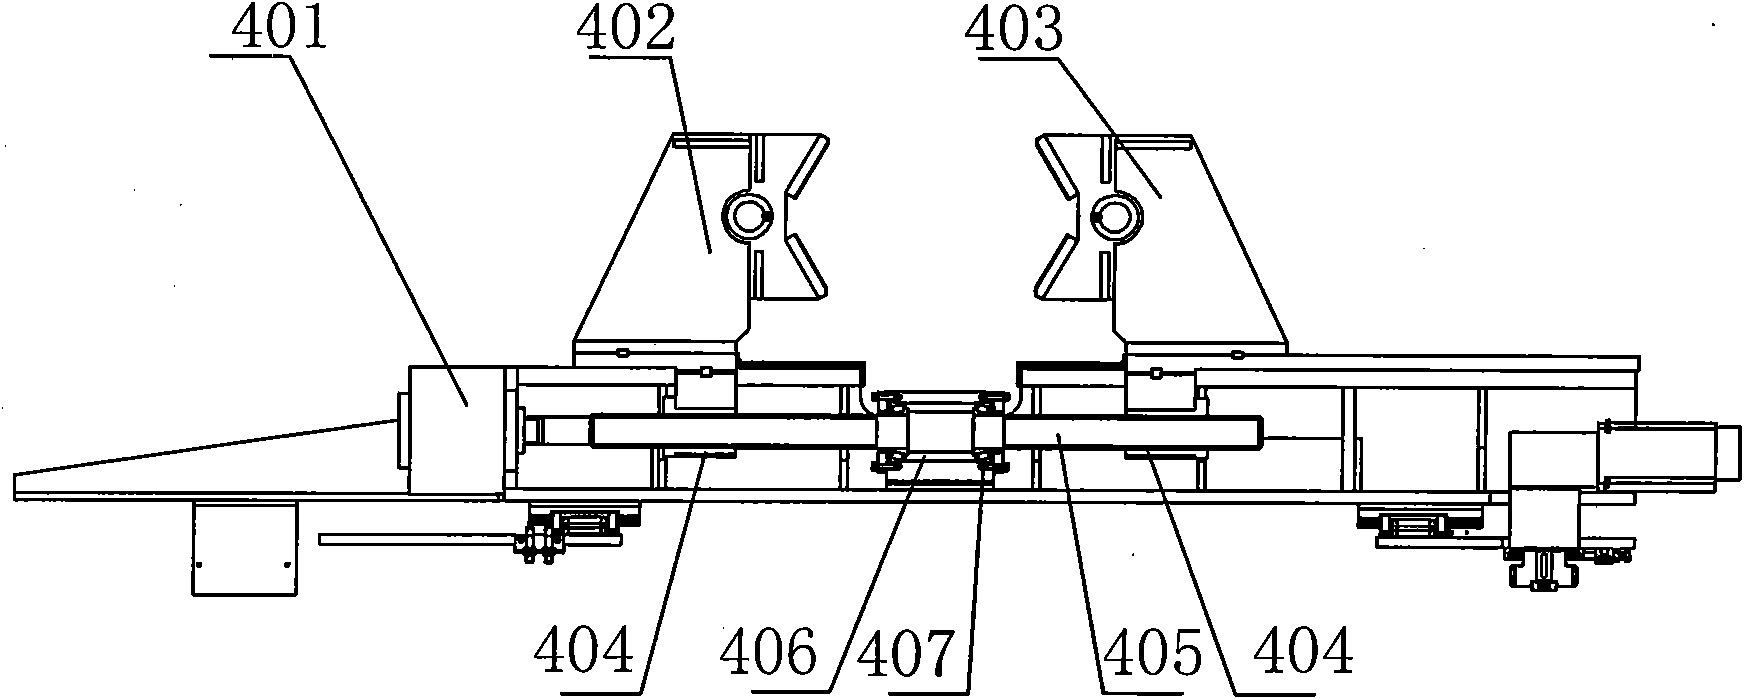 Centering clamping mechanism of CNC (Computerized Numerical Control) drilling machine of pipe fittings